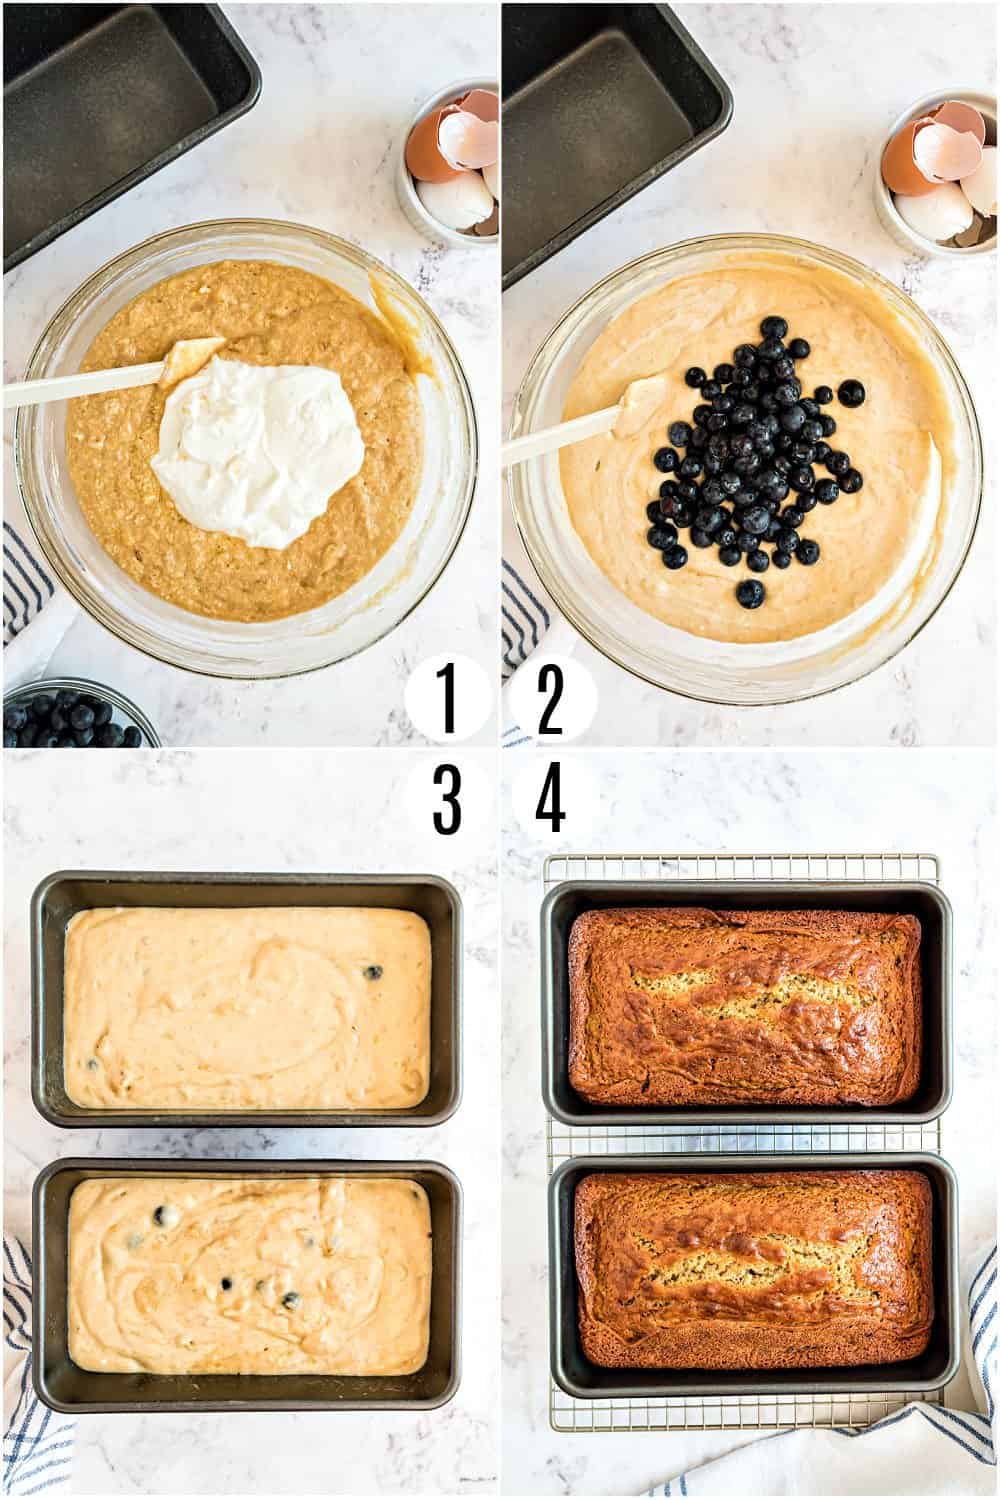 Step by step photos showing how to make blueberry banana bread.